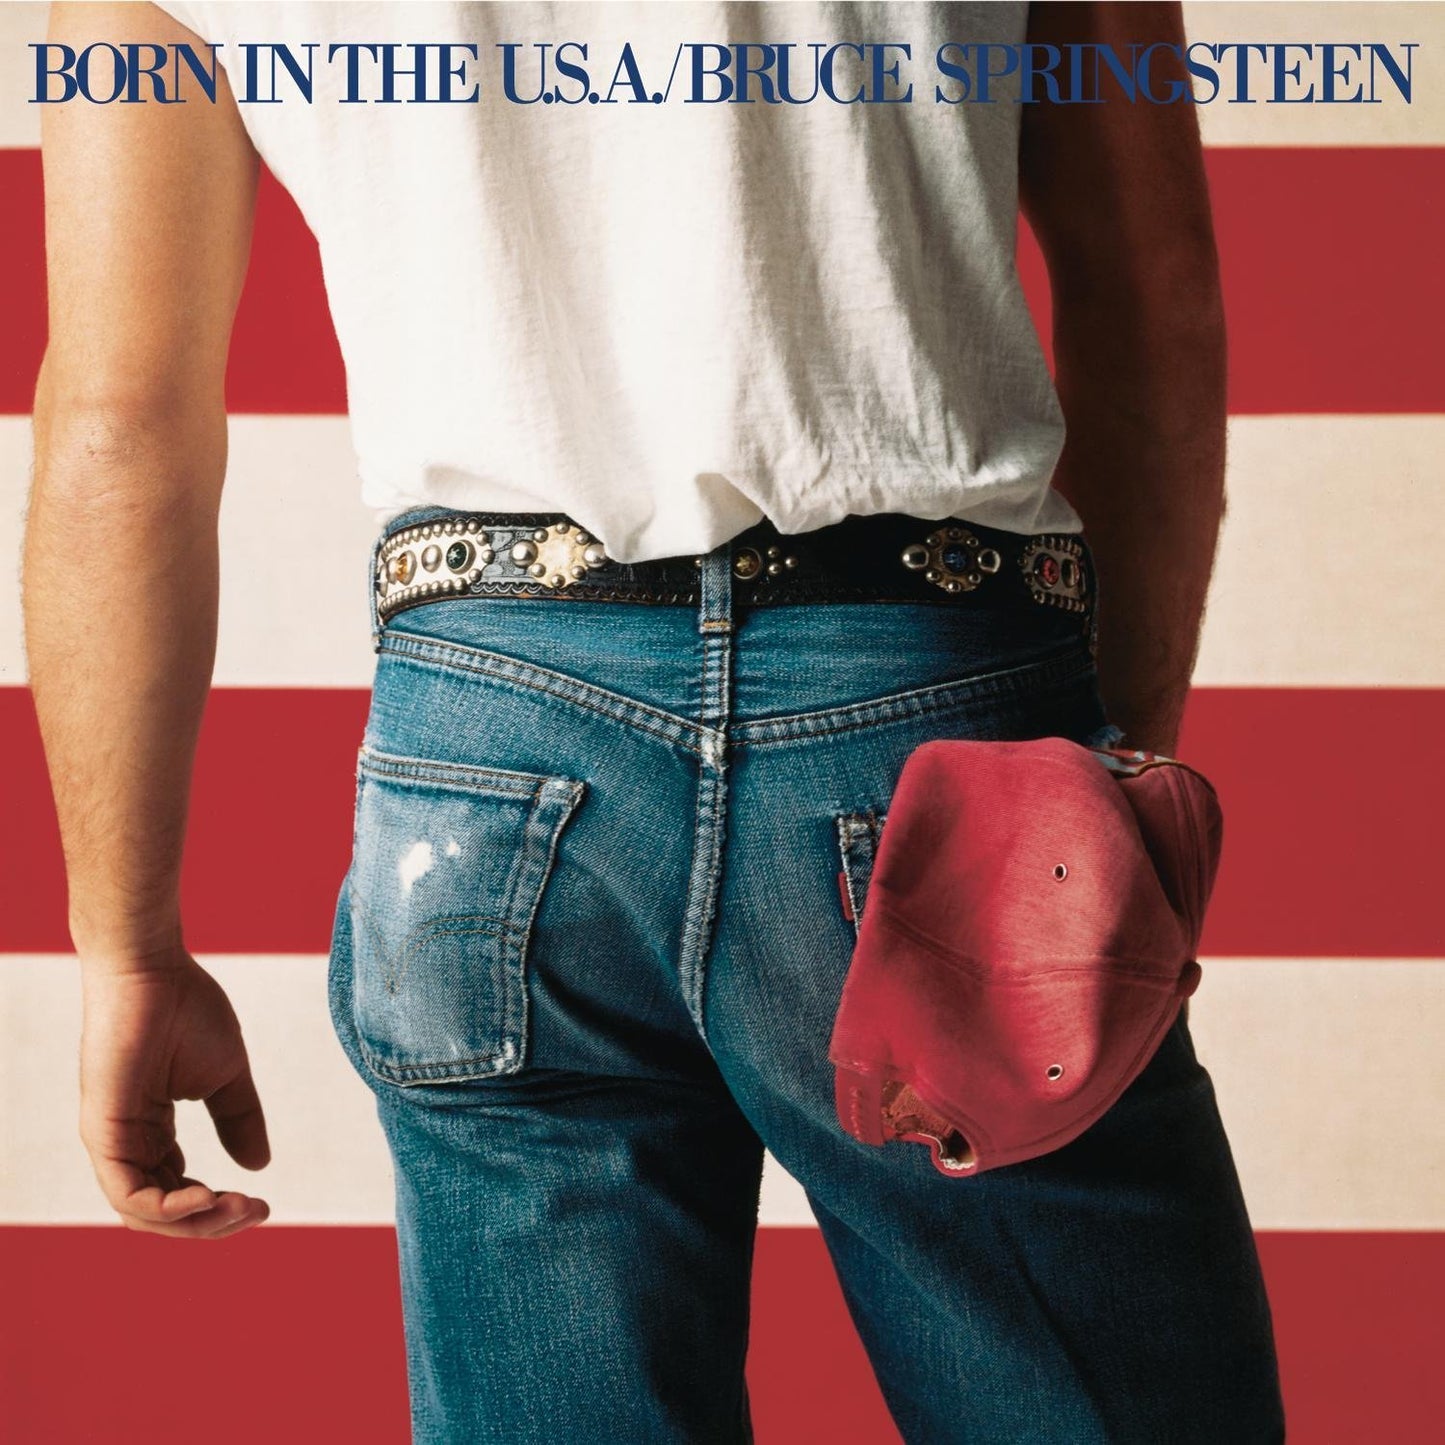 LP - Bruce Springsteen - Born In The USA